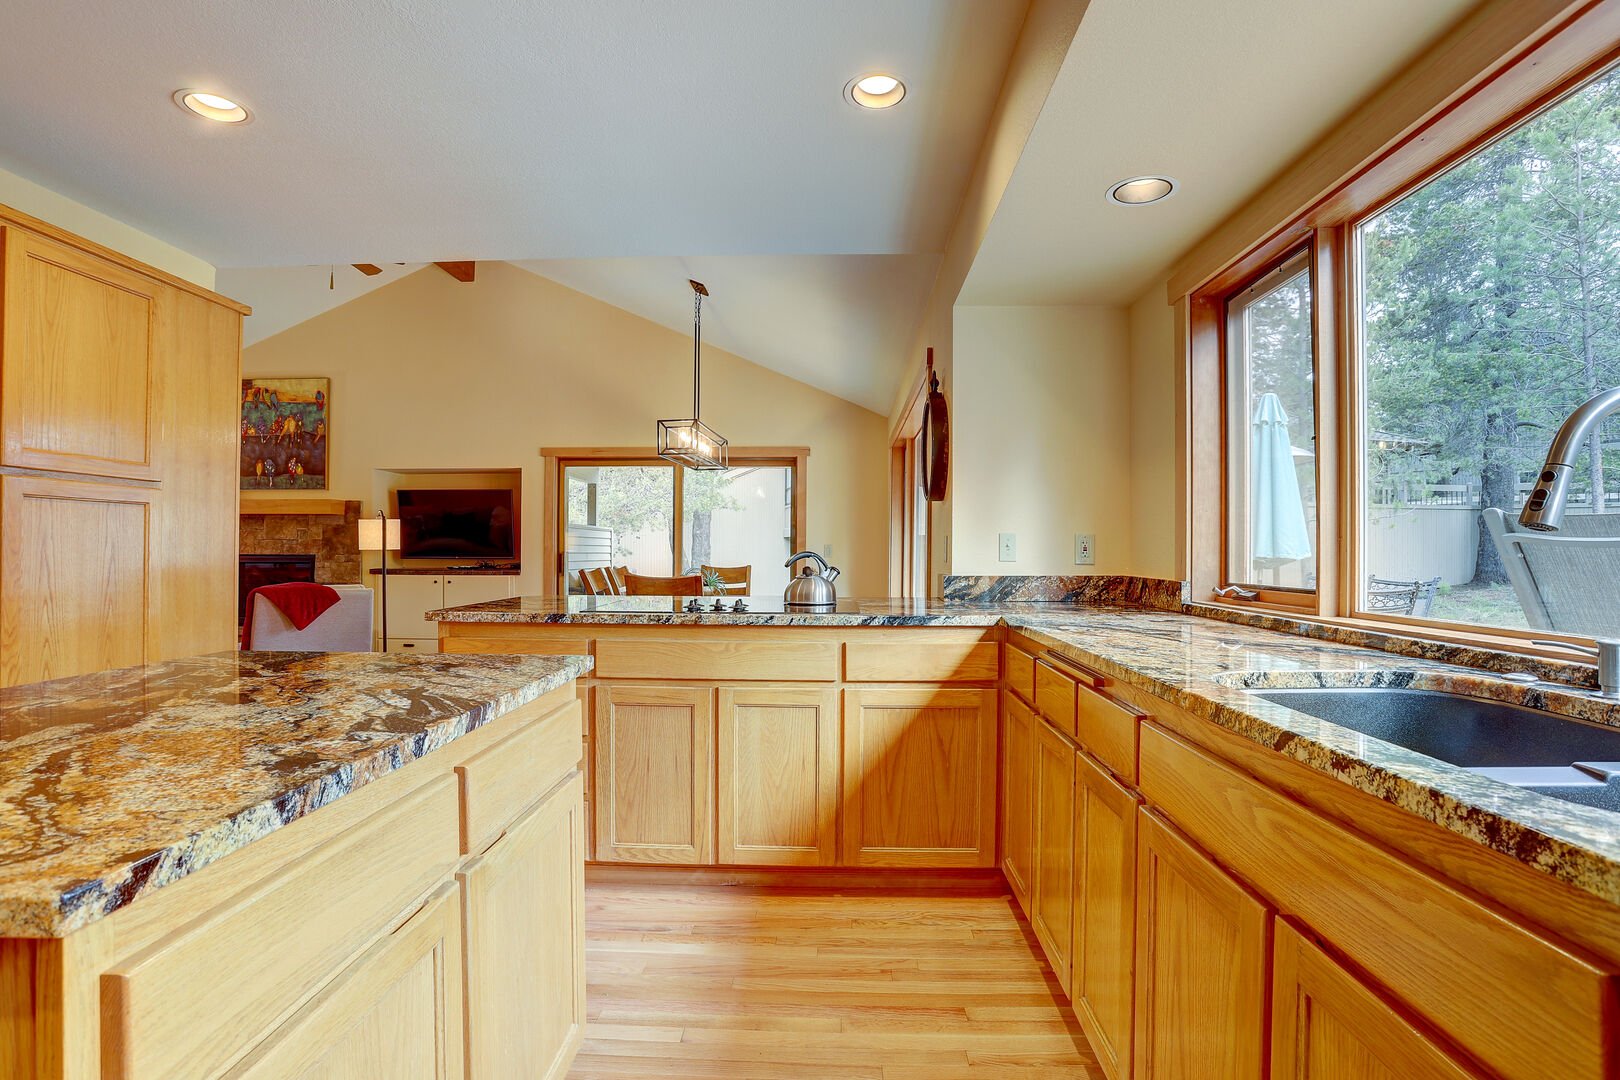 The kitchen is large, roomy and very well equipped.